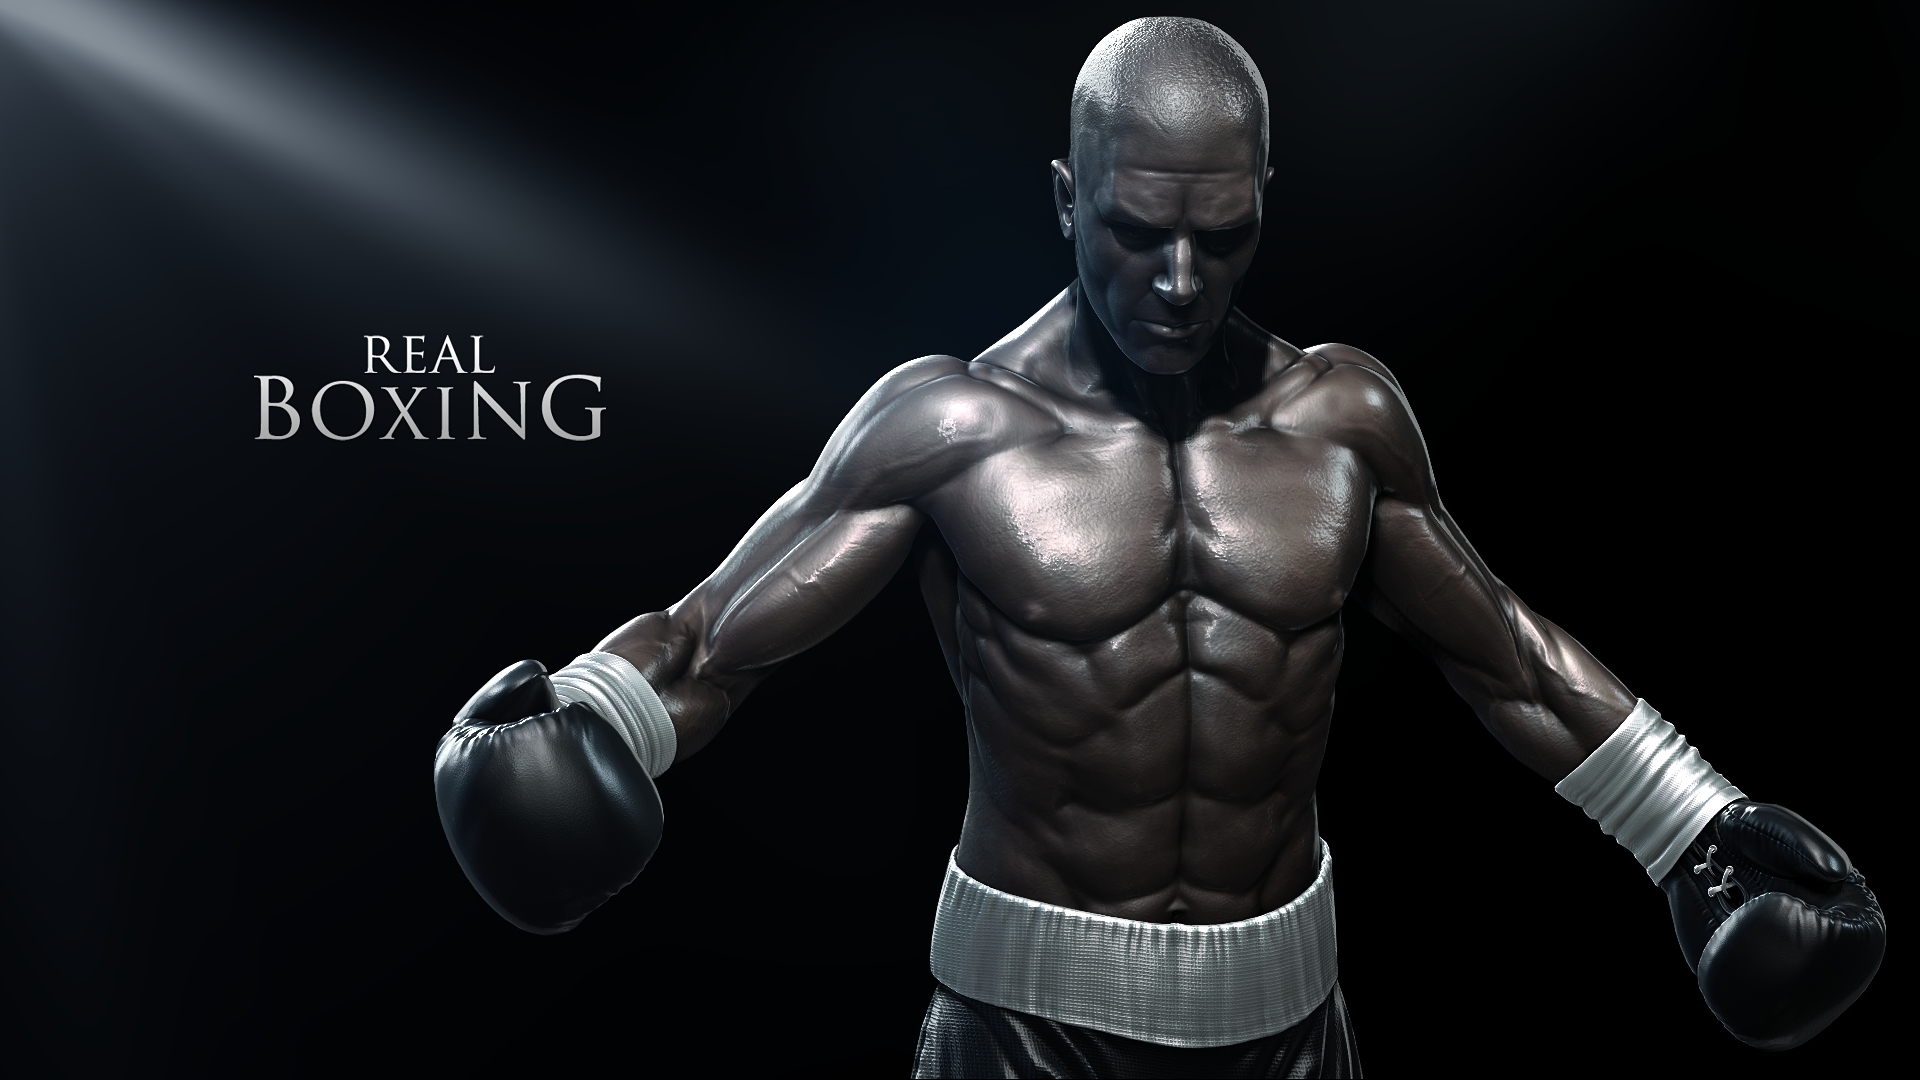 Real Boxing HD Wallpaper | Background Image | 1920x1080 ...